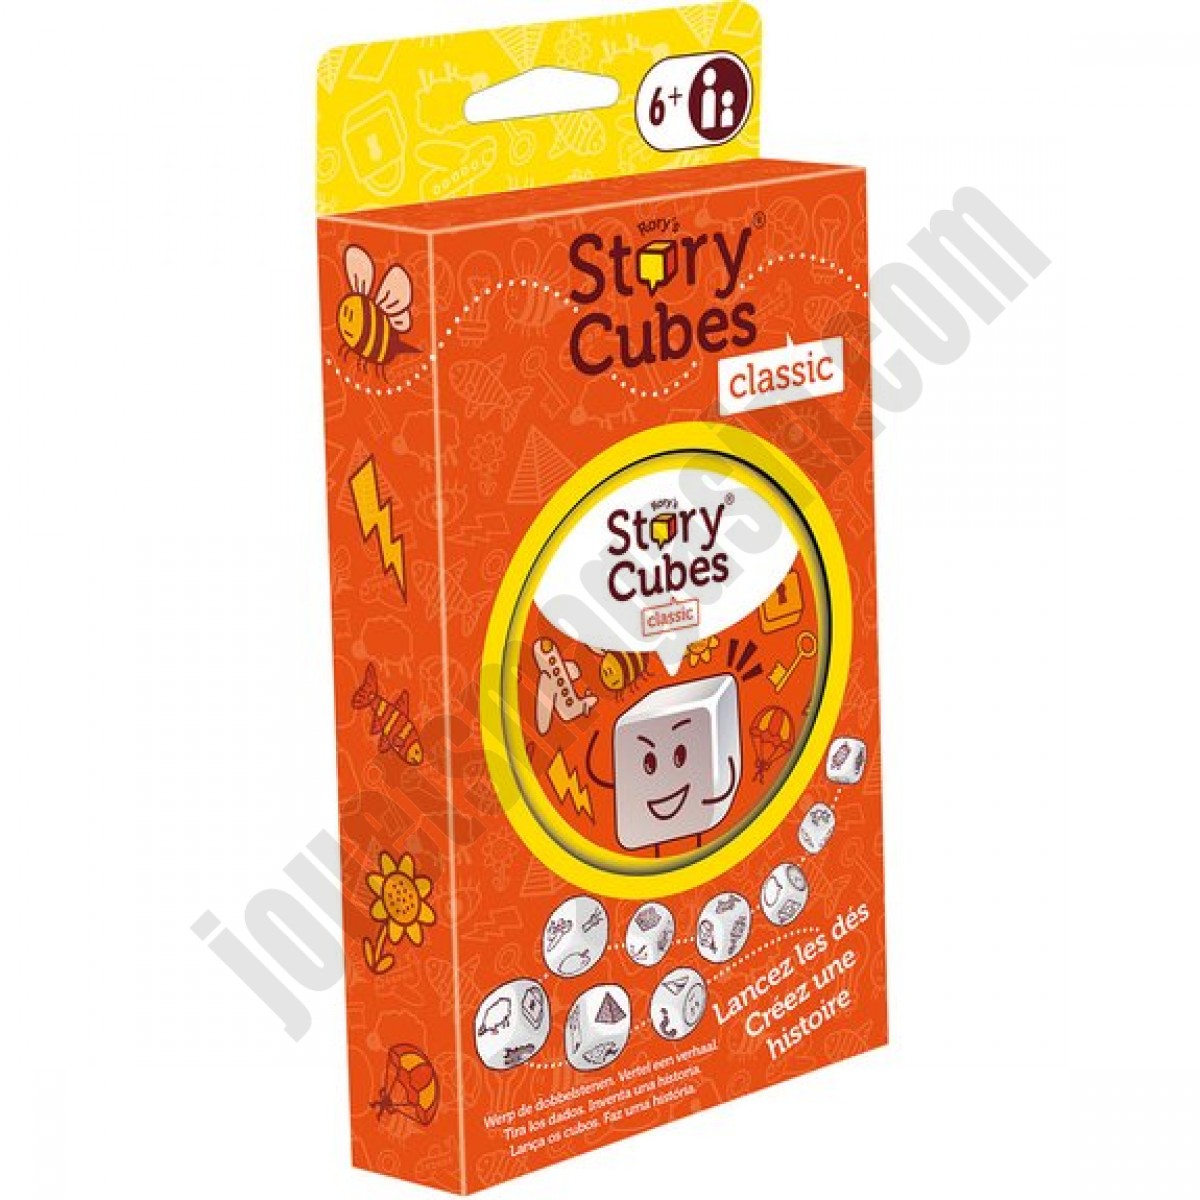 Rory's Story Cubes : Classic En promotion - Rory's Story Cubes : Classic En promotion